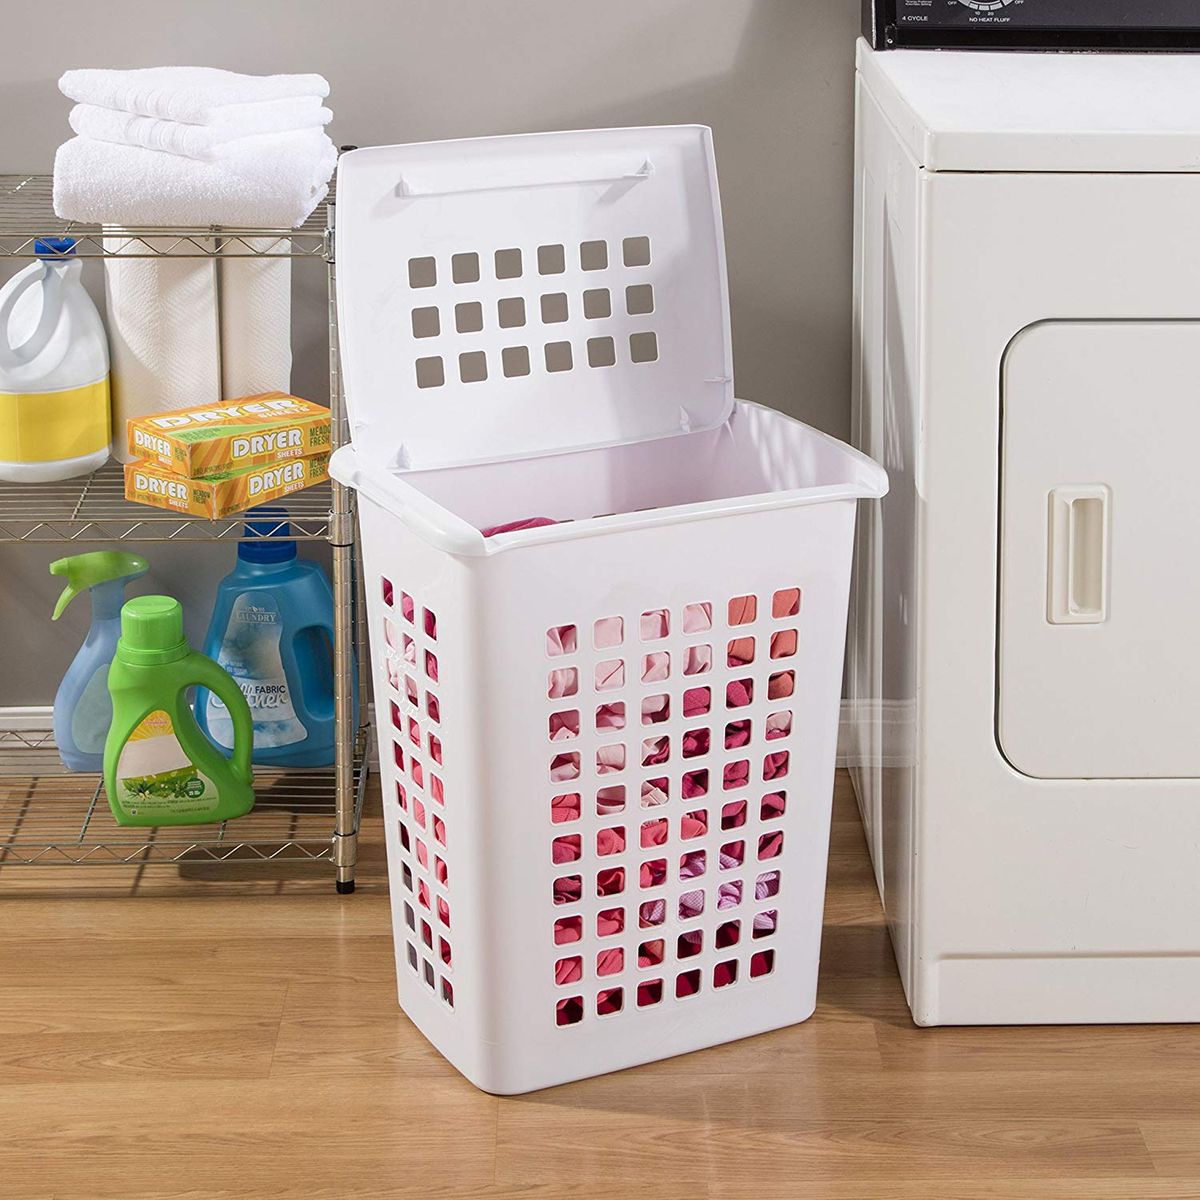 2 x 60 L Set of 2 Sturdy Laundry Baskets Laundry Bags to Help Sort Clothes and Toys Without Collapsing Laundry Baskets 